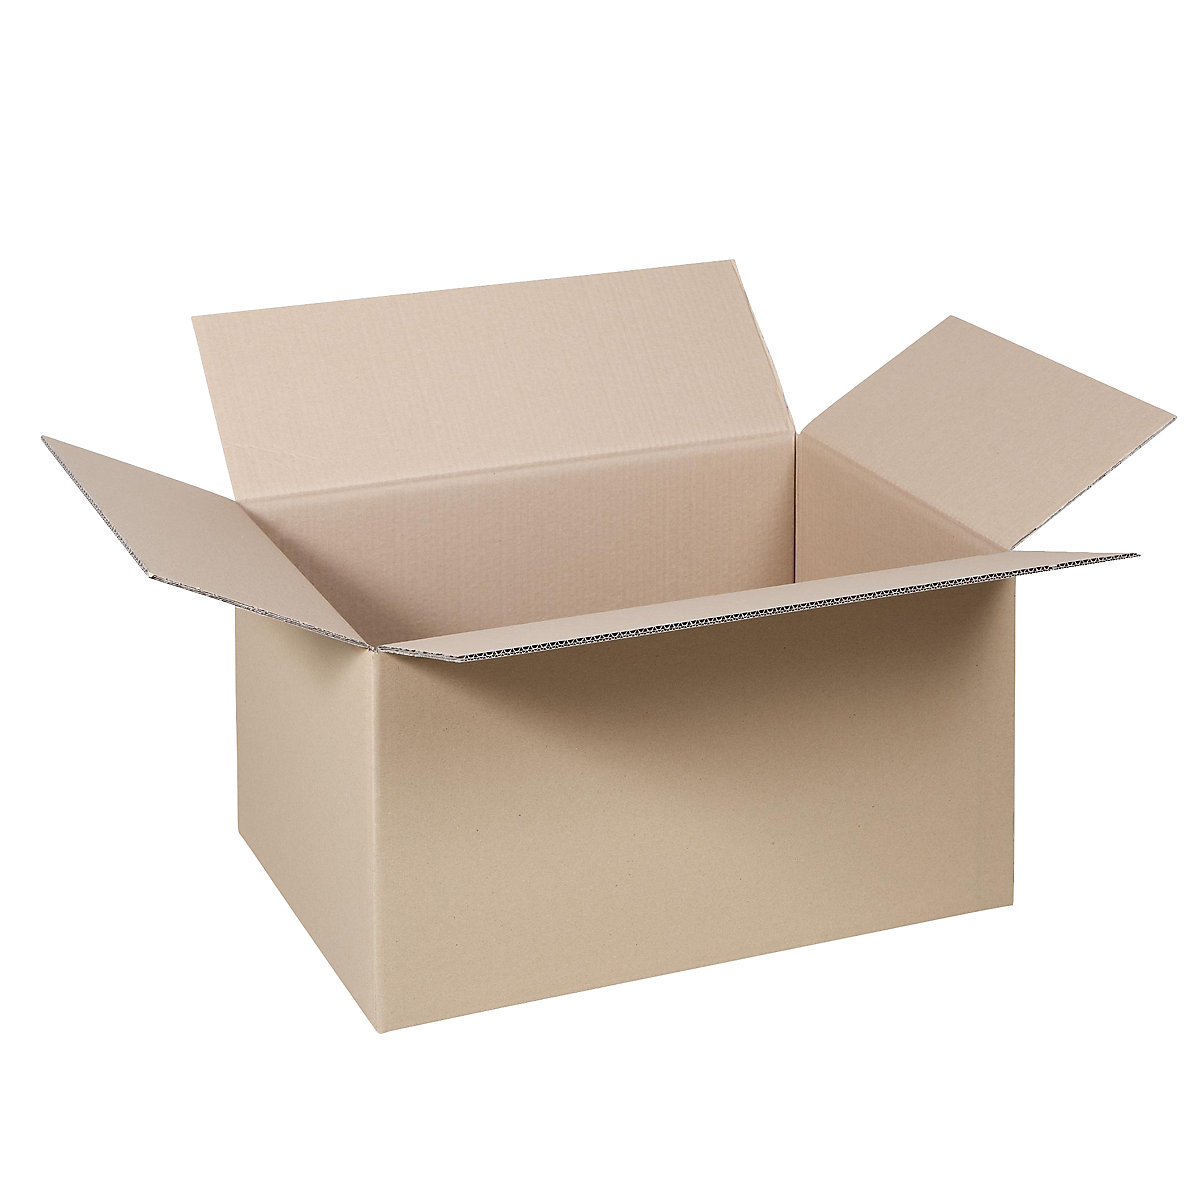 Folding cardboard box, FEFCO 0201, made of double fluted cardboard, internal dimensions 800 x 600 x 500 mm, pack of 100-40